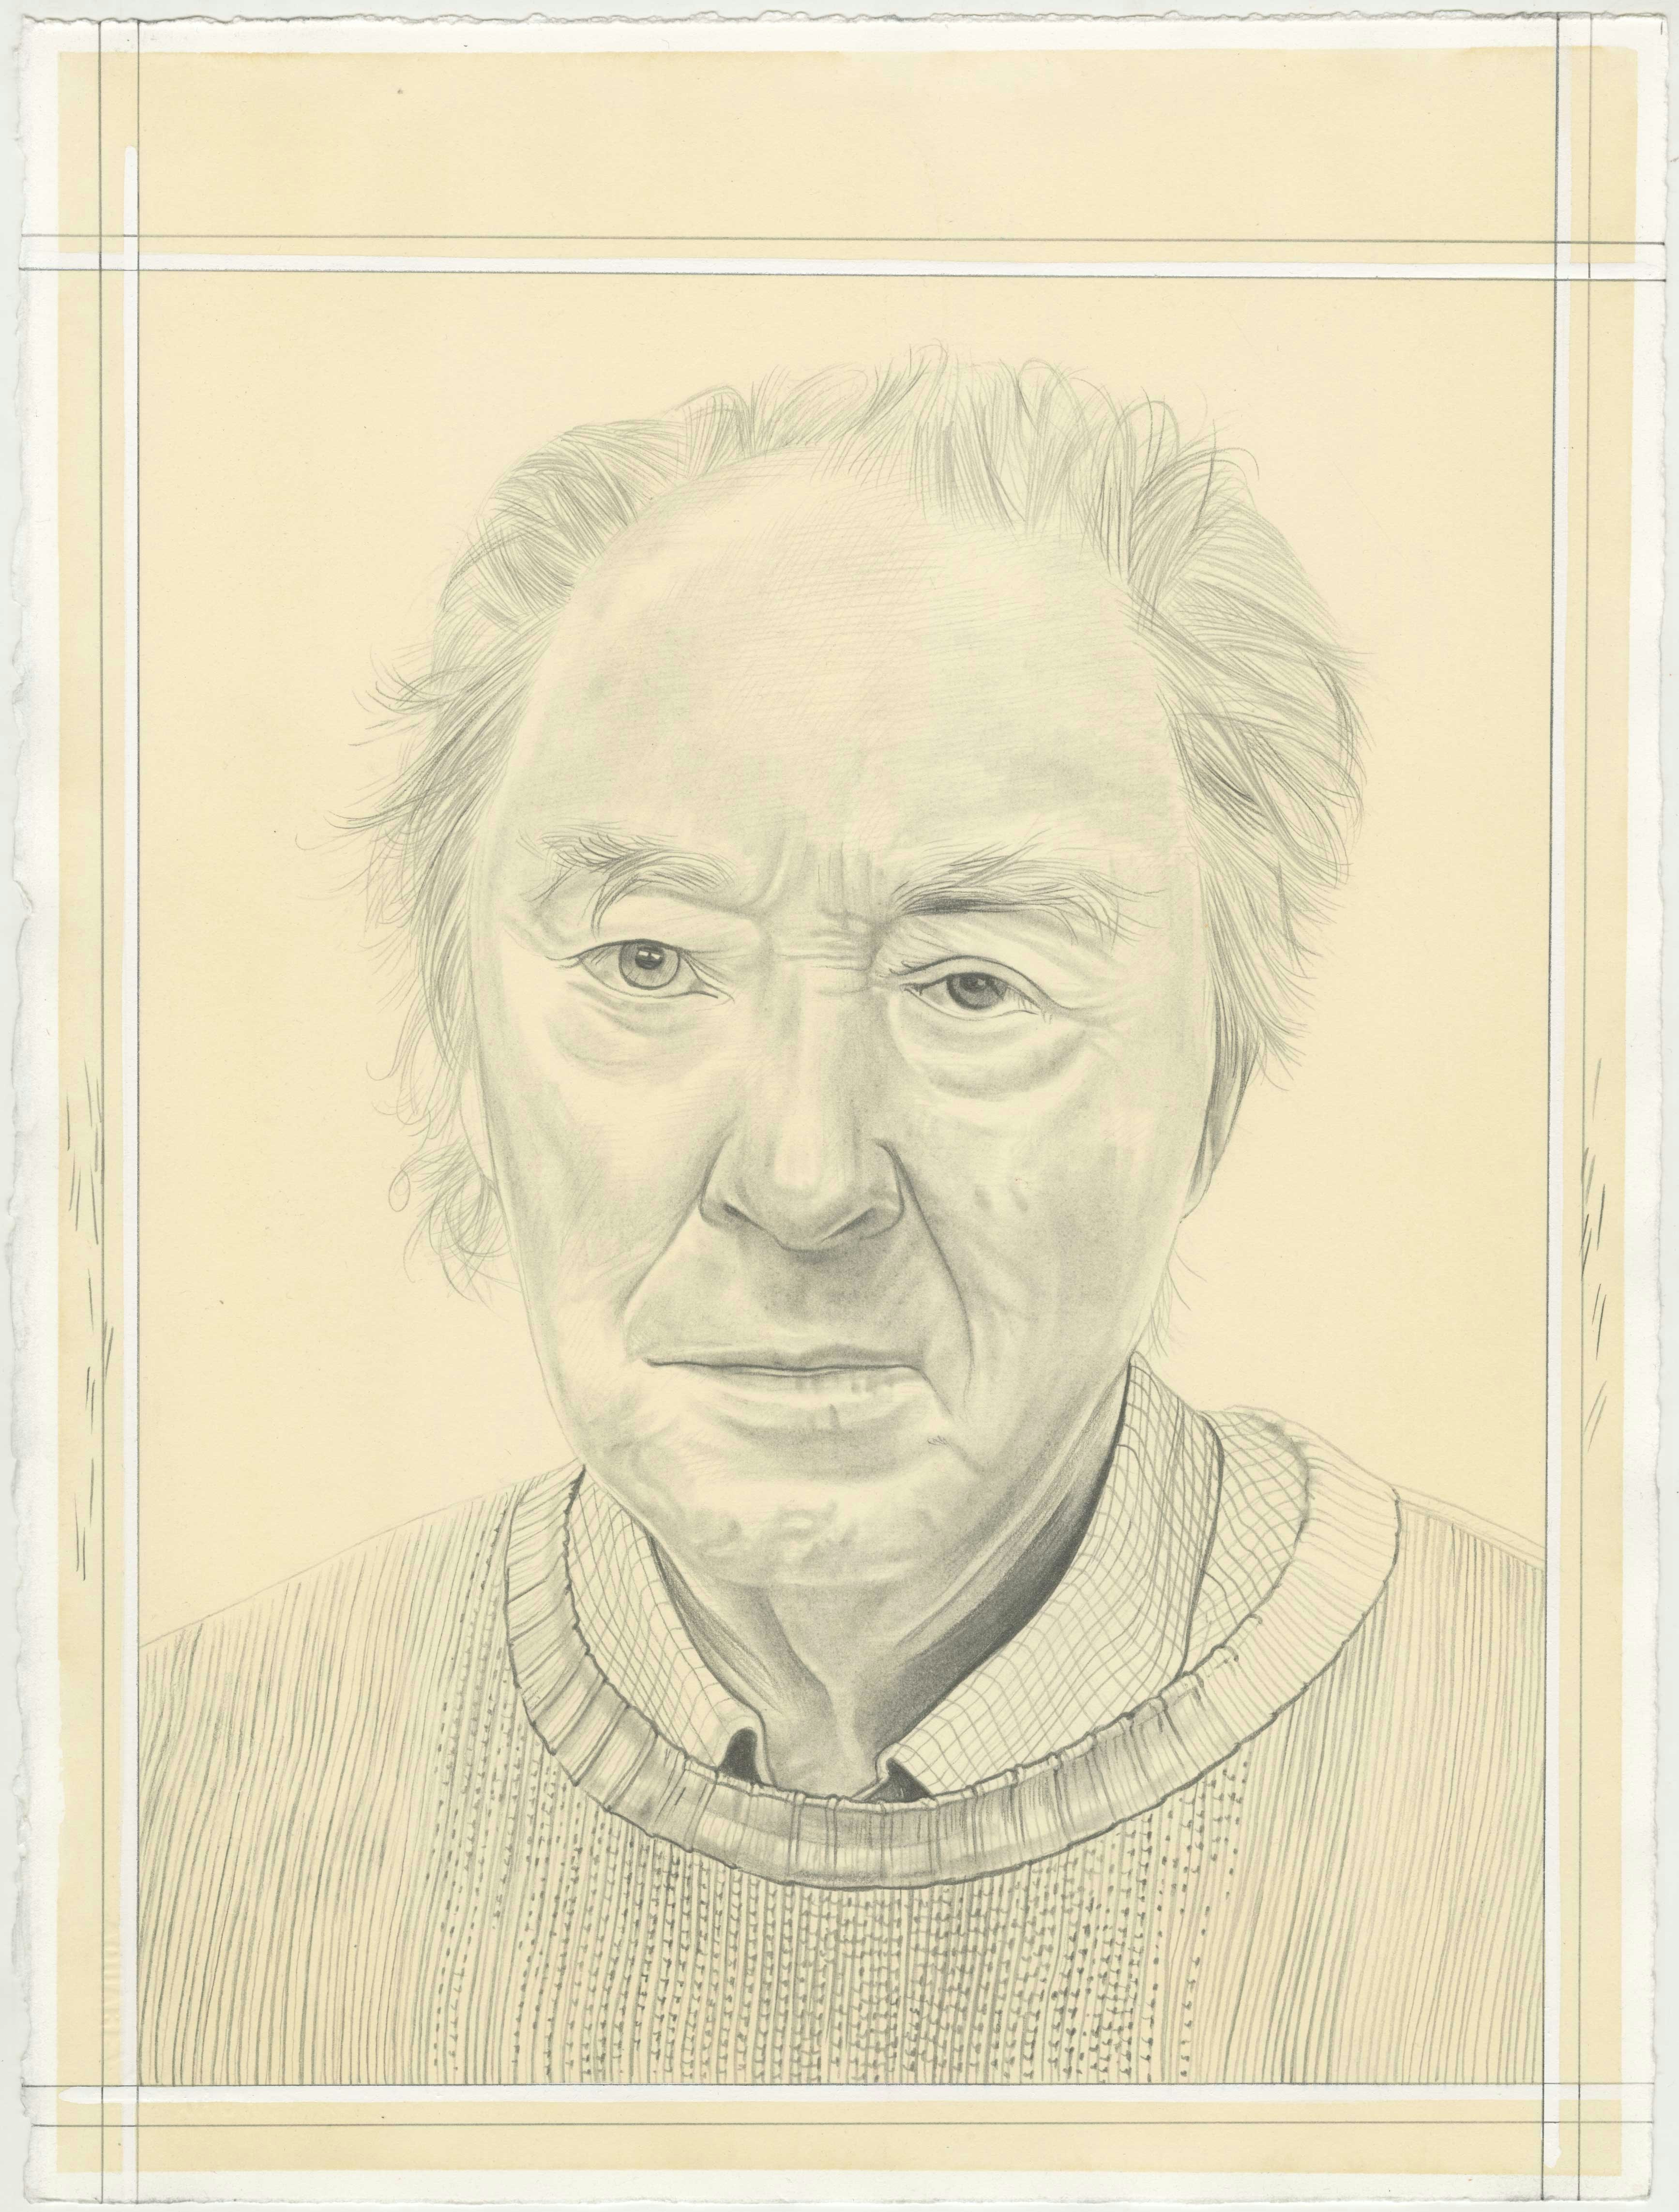 Portrait of Michael Snow, pencil on paper by Phong H. Bui.